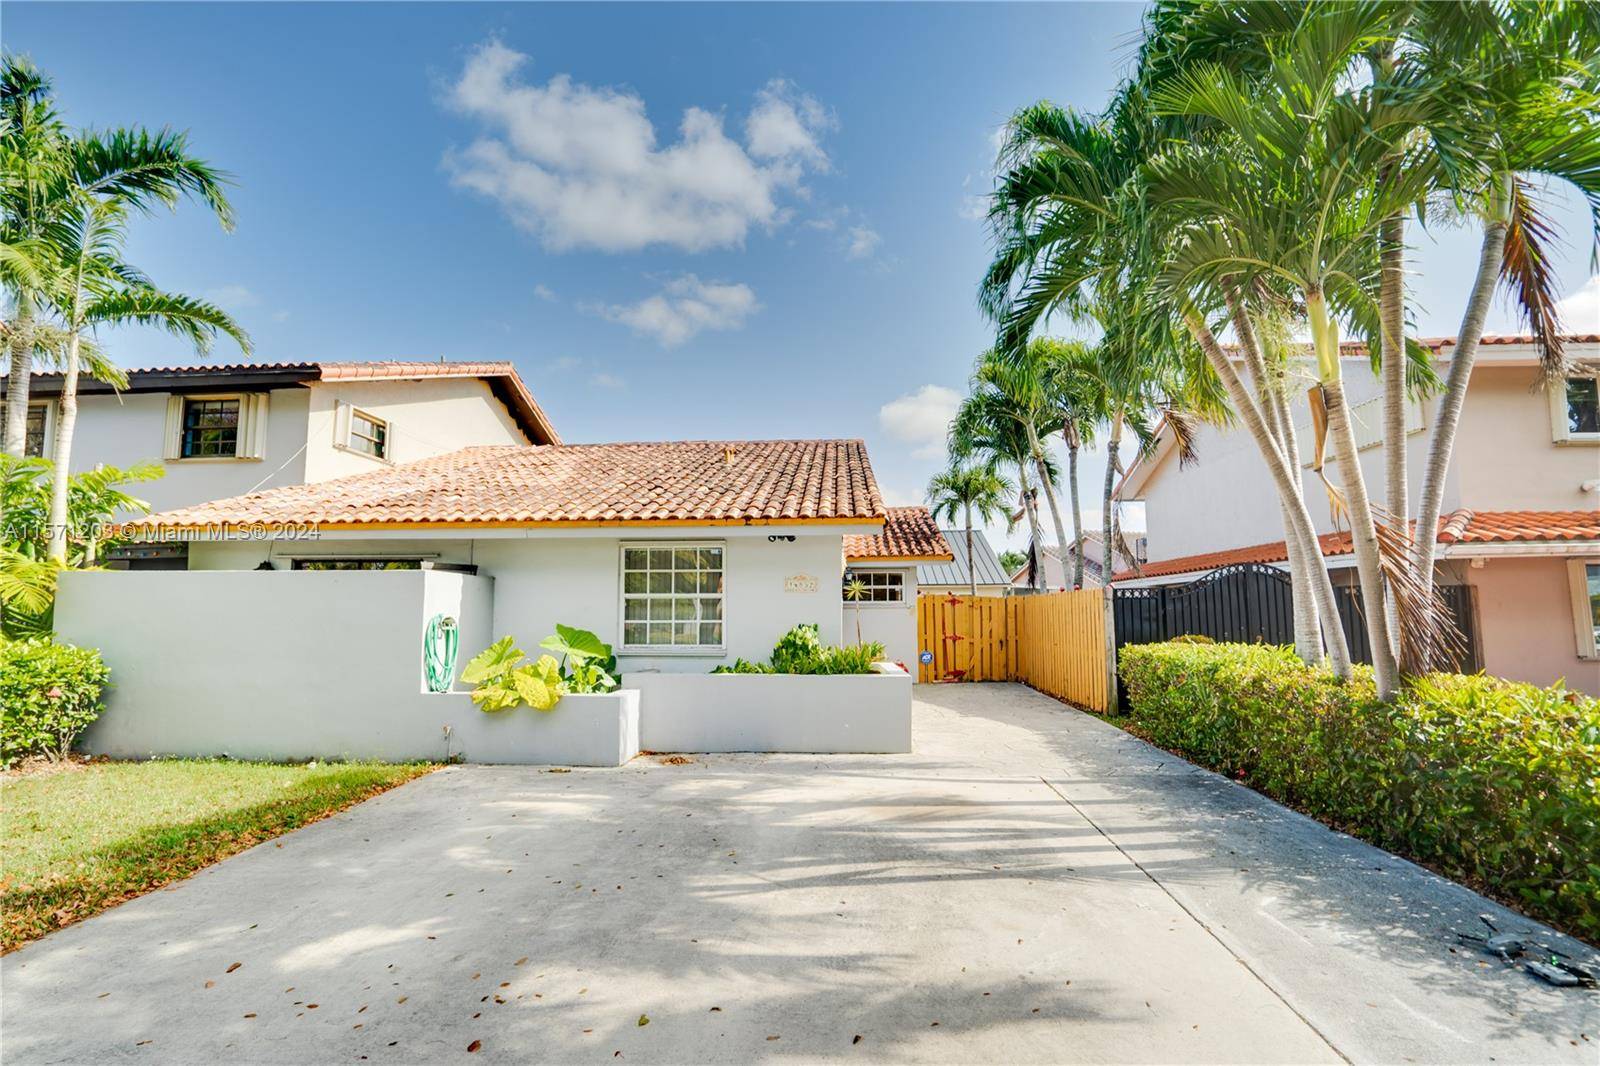 Embrace the opportunity to unlock the potential of this charming villa located in the desirable Kendall neighborhood.